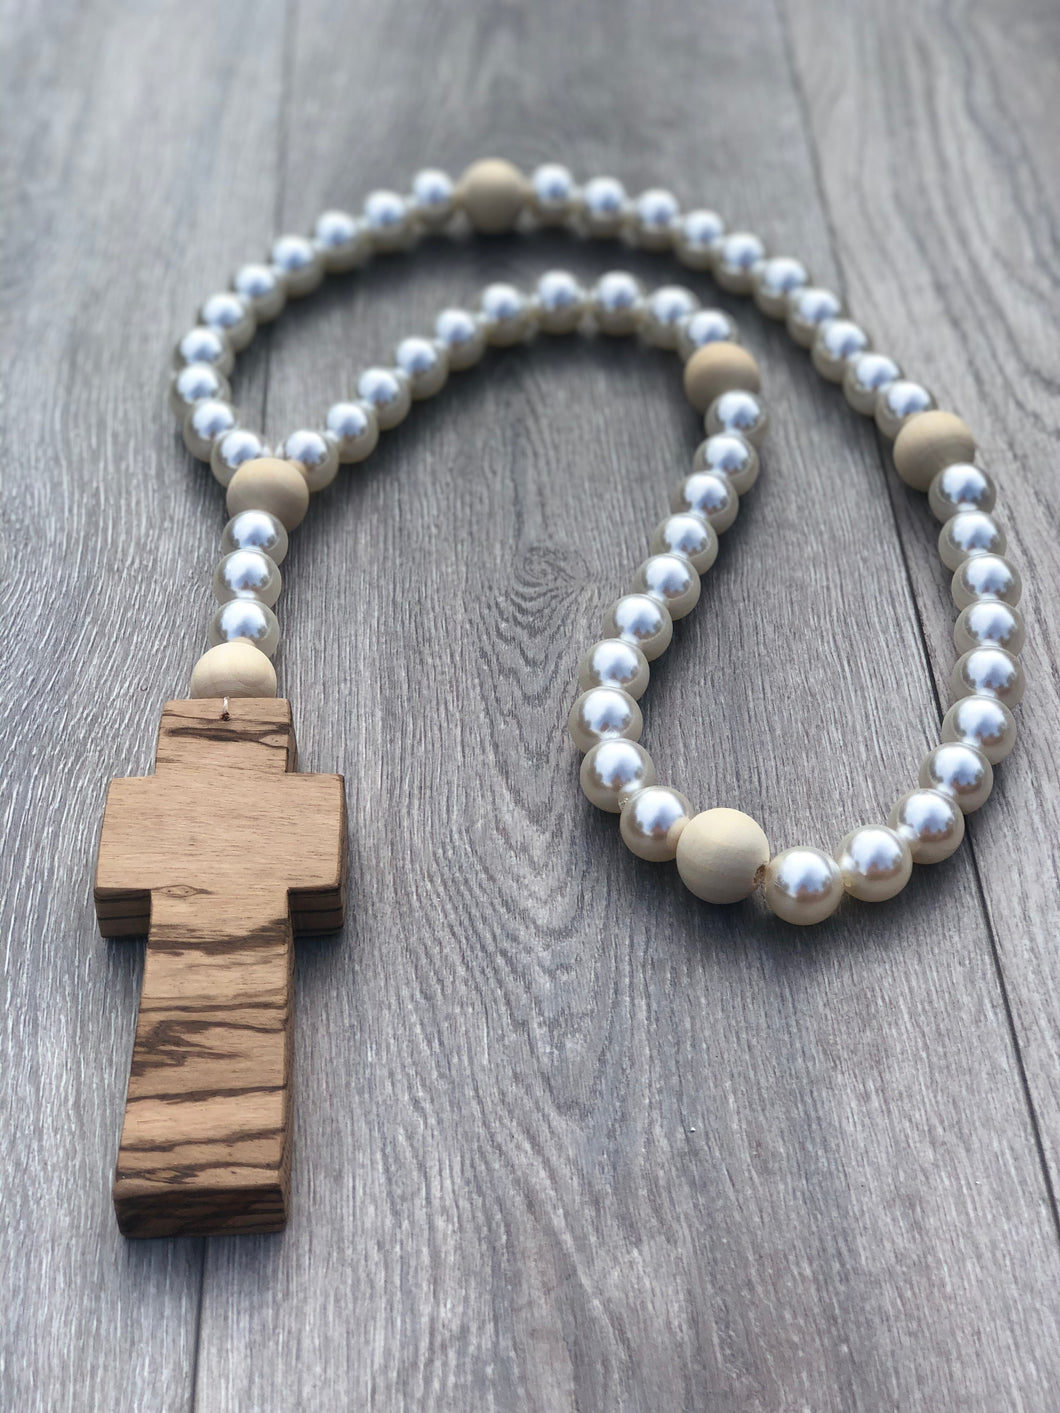 Handcrafted Cross + Pearl Rosary